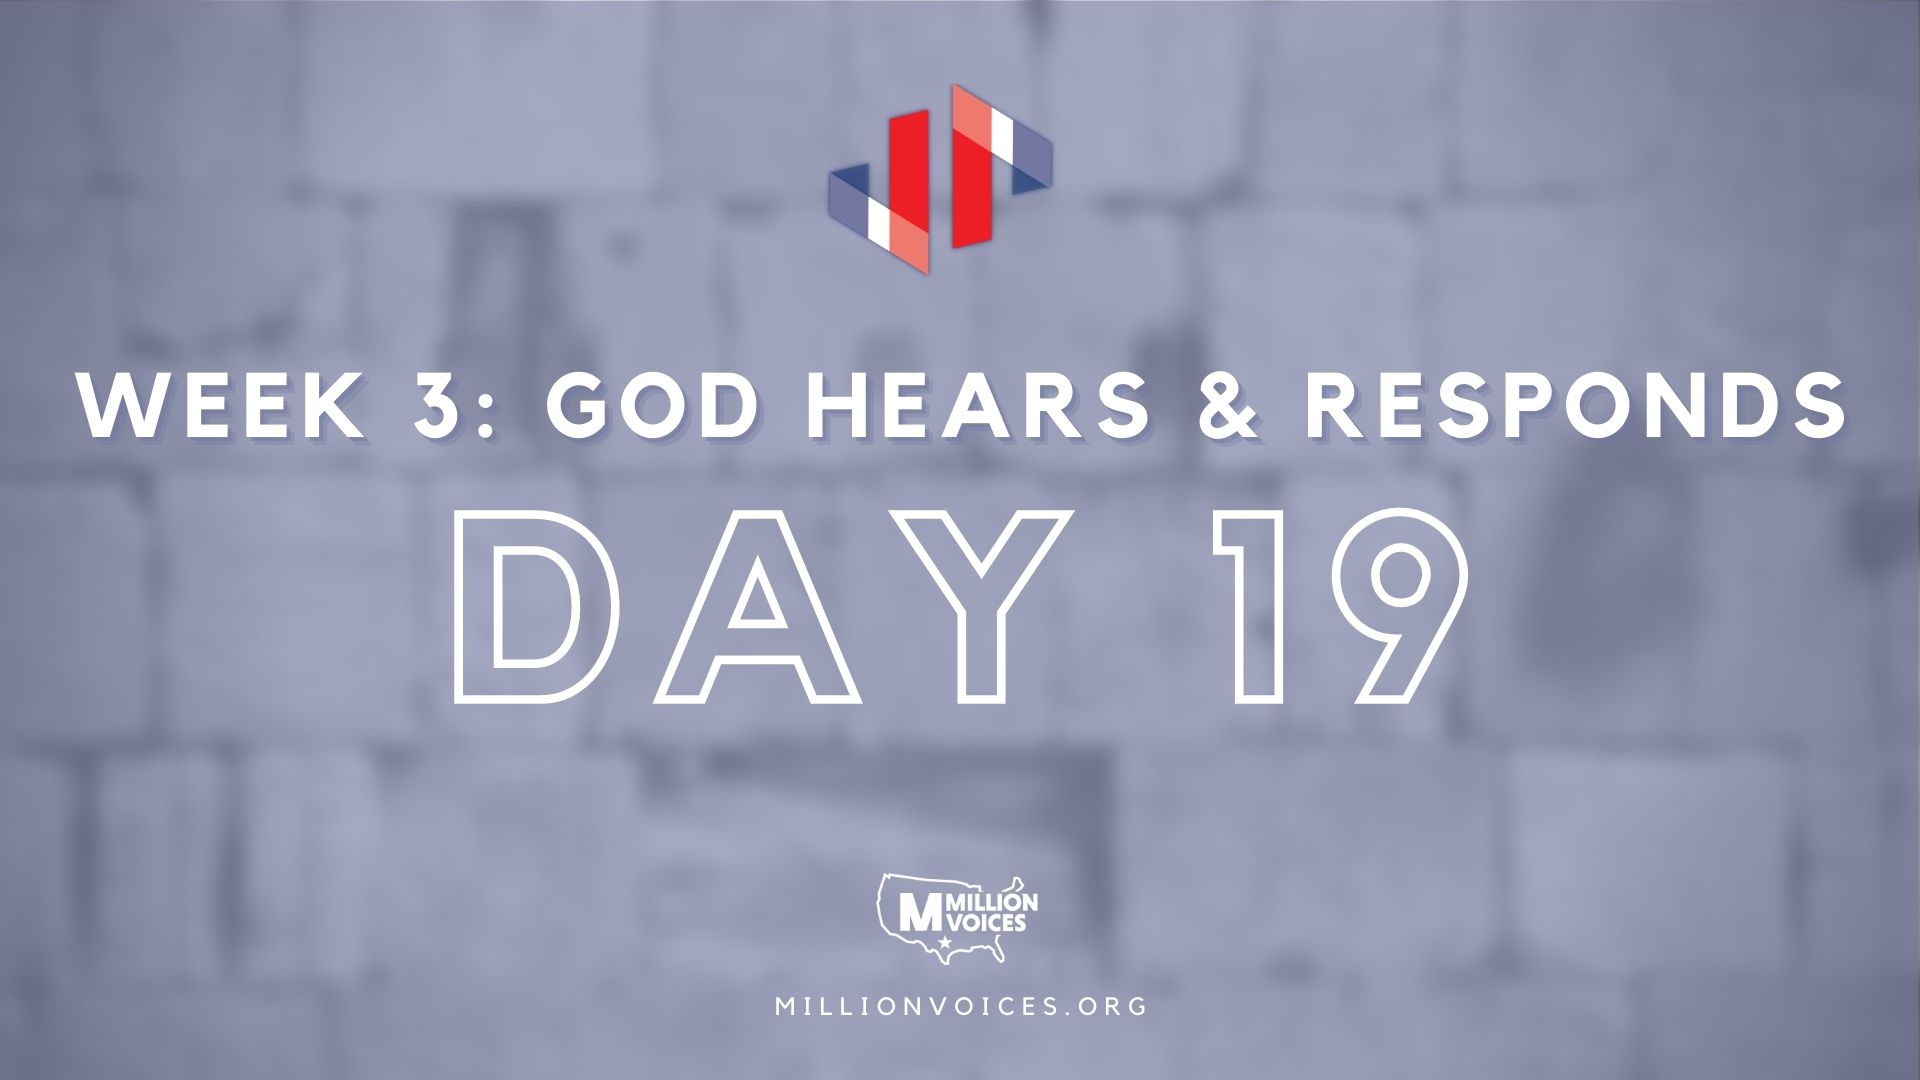 Million Voices - Pause to Pray Images Day 19